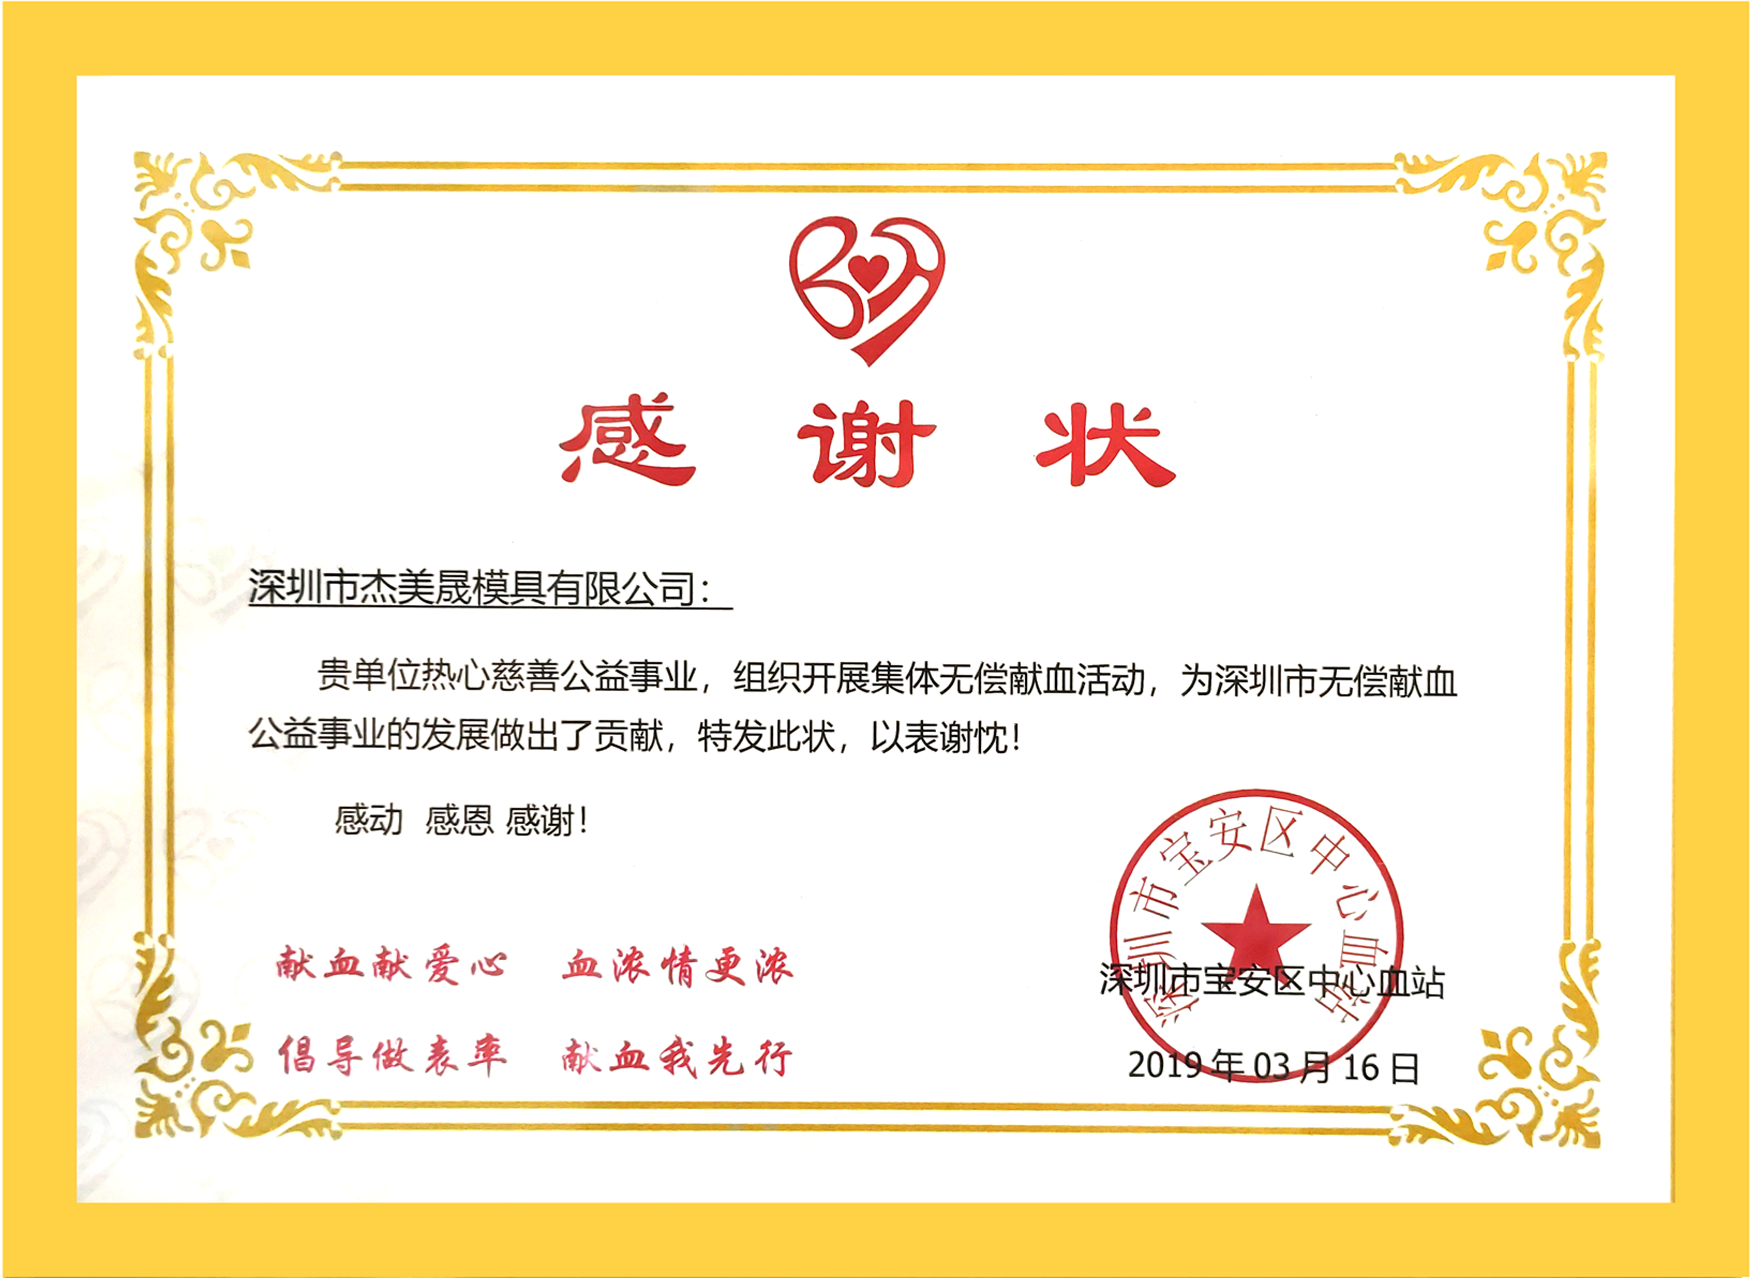 Honorary Certificate of Collective Blood Donation